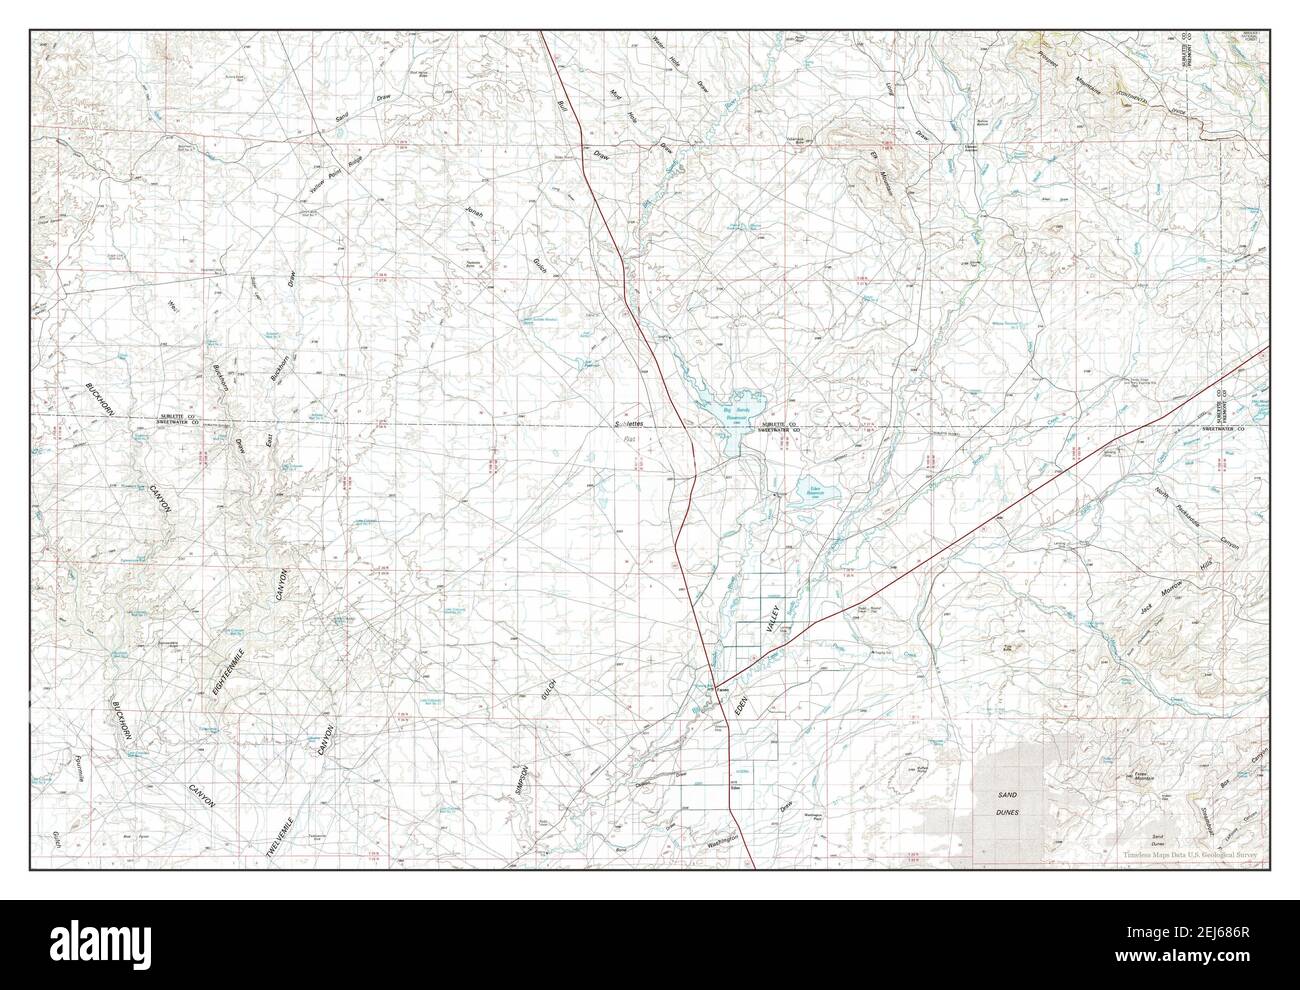 Farson Wyoming Map 1980 1100000 United States Of America By Timeless Maps Data Us Geological Survey 2EJ686R 